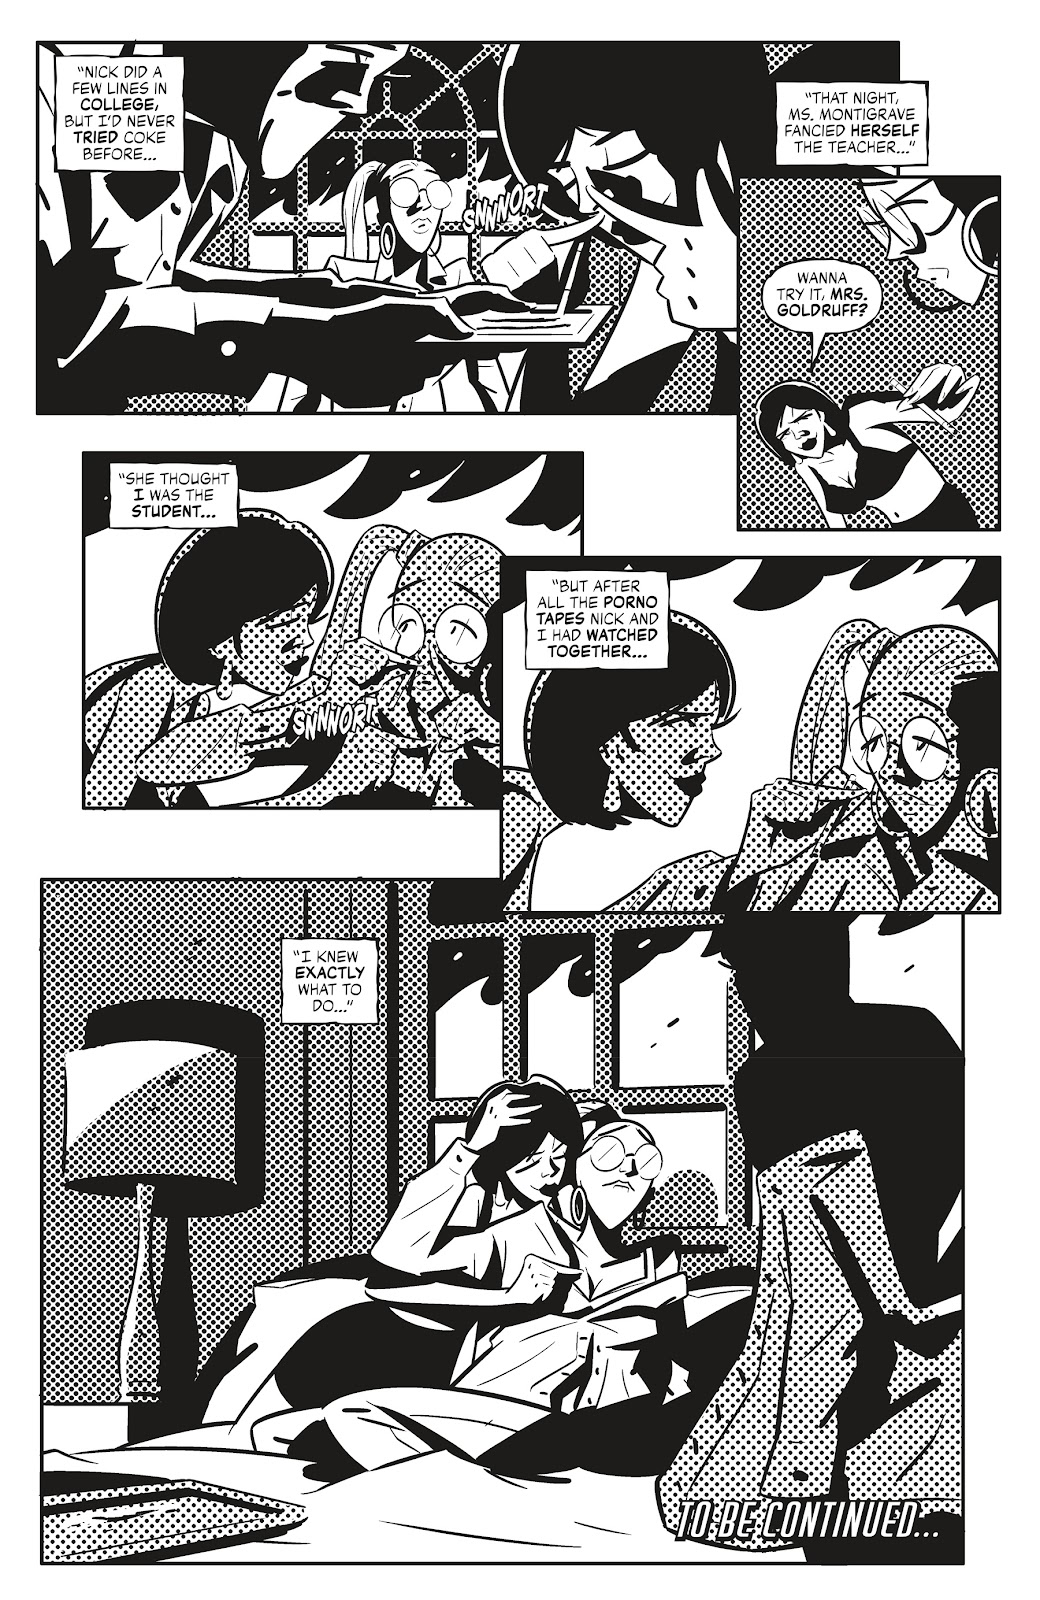 Quick Stops Vol. 2 issue 1 - Page 22